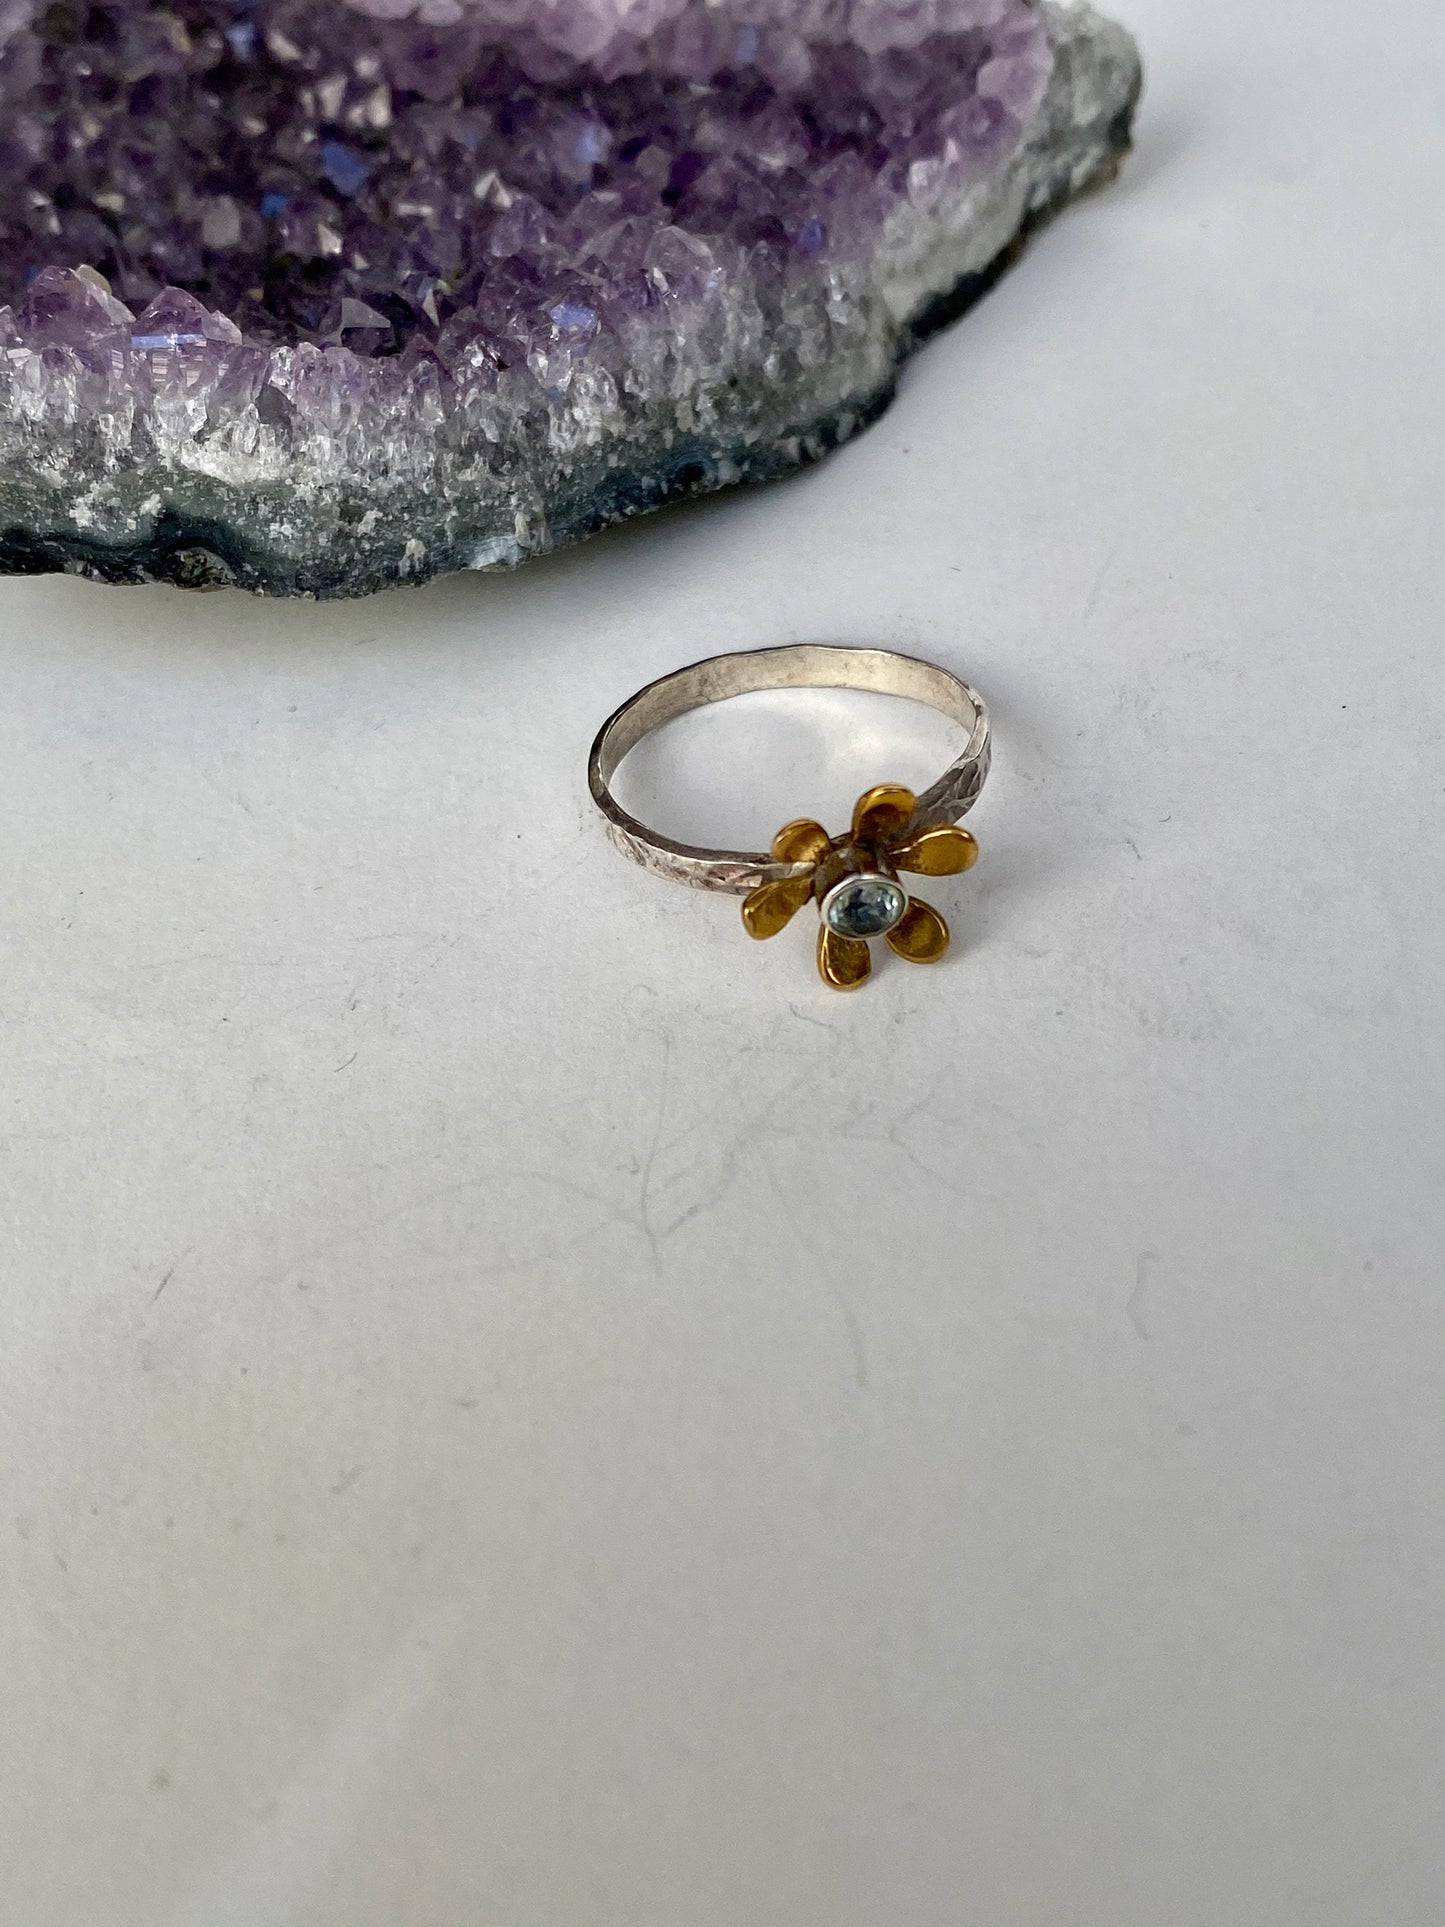 Precious size 7 ring with sterling silver band, blue topaz and brass flower design.